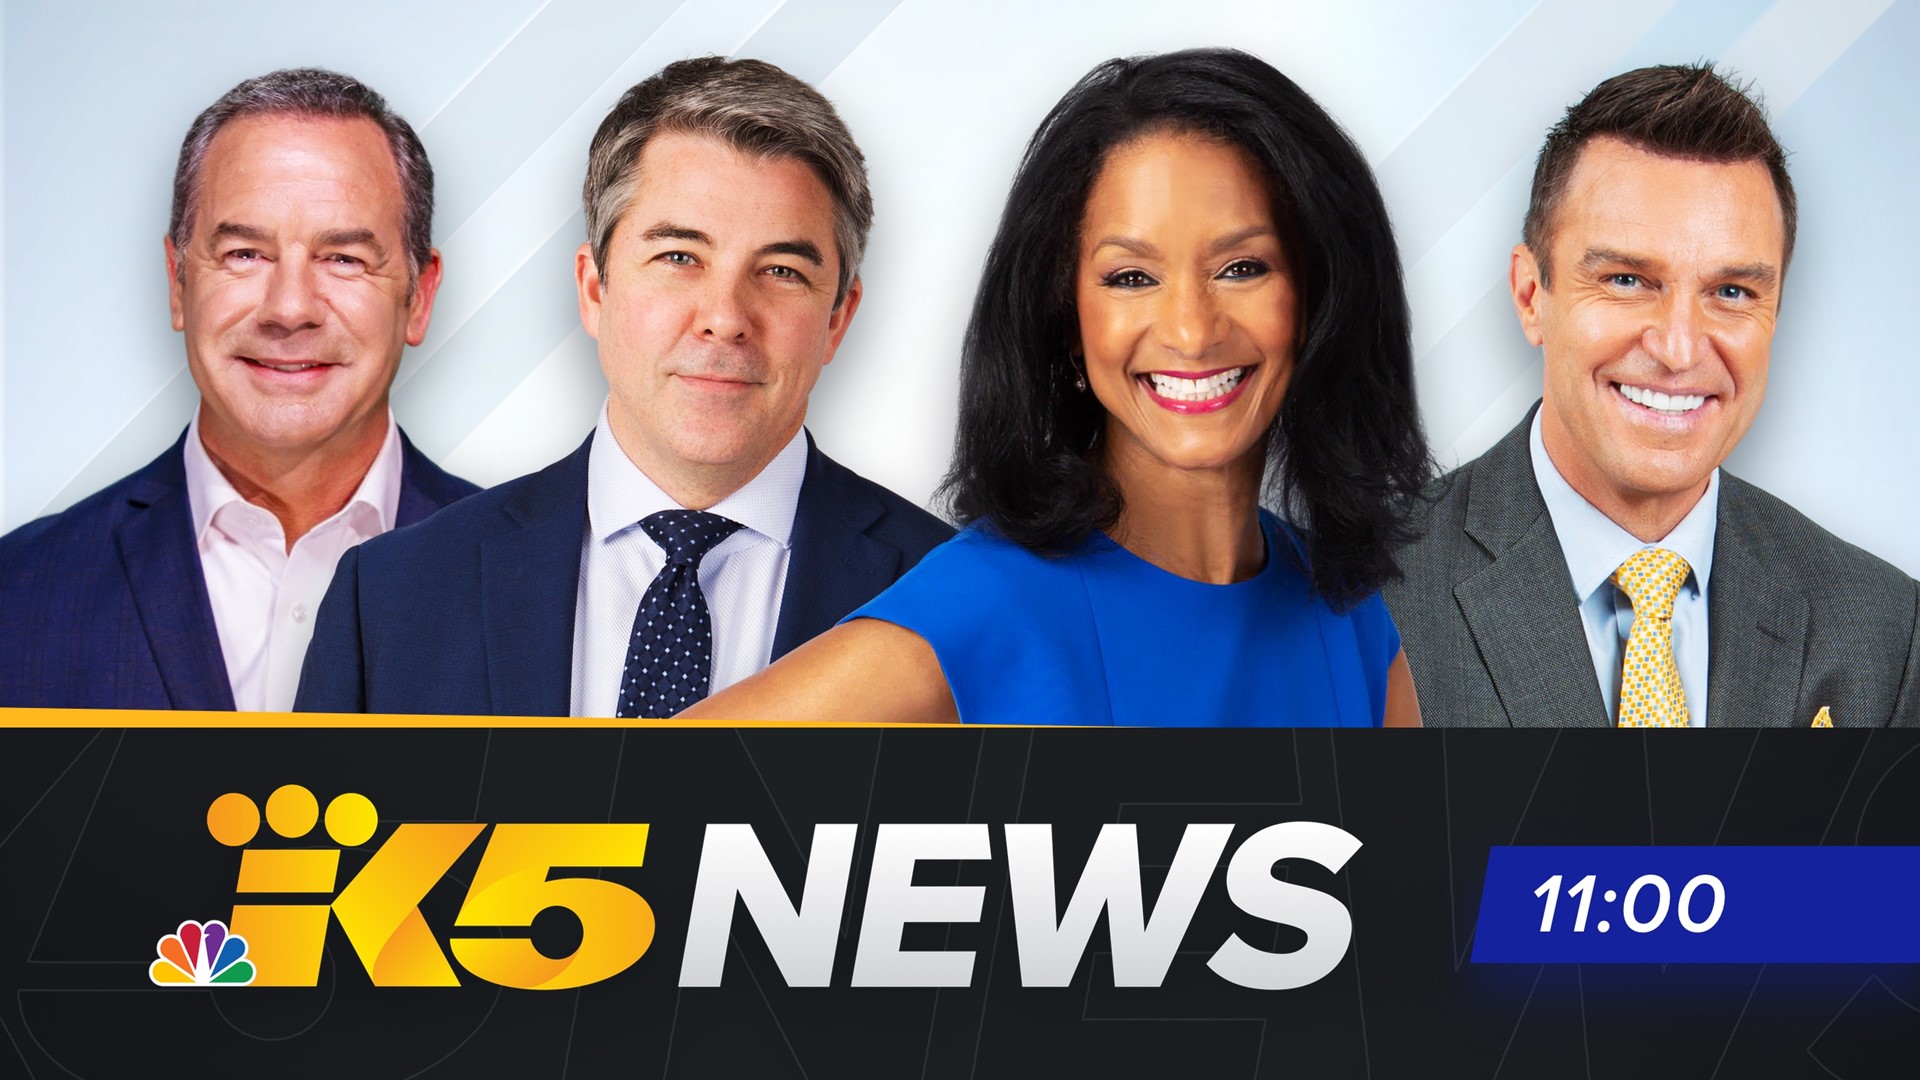 The KING 5 News Team presents the day's major news events, local sports updates, and weather forecast.
